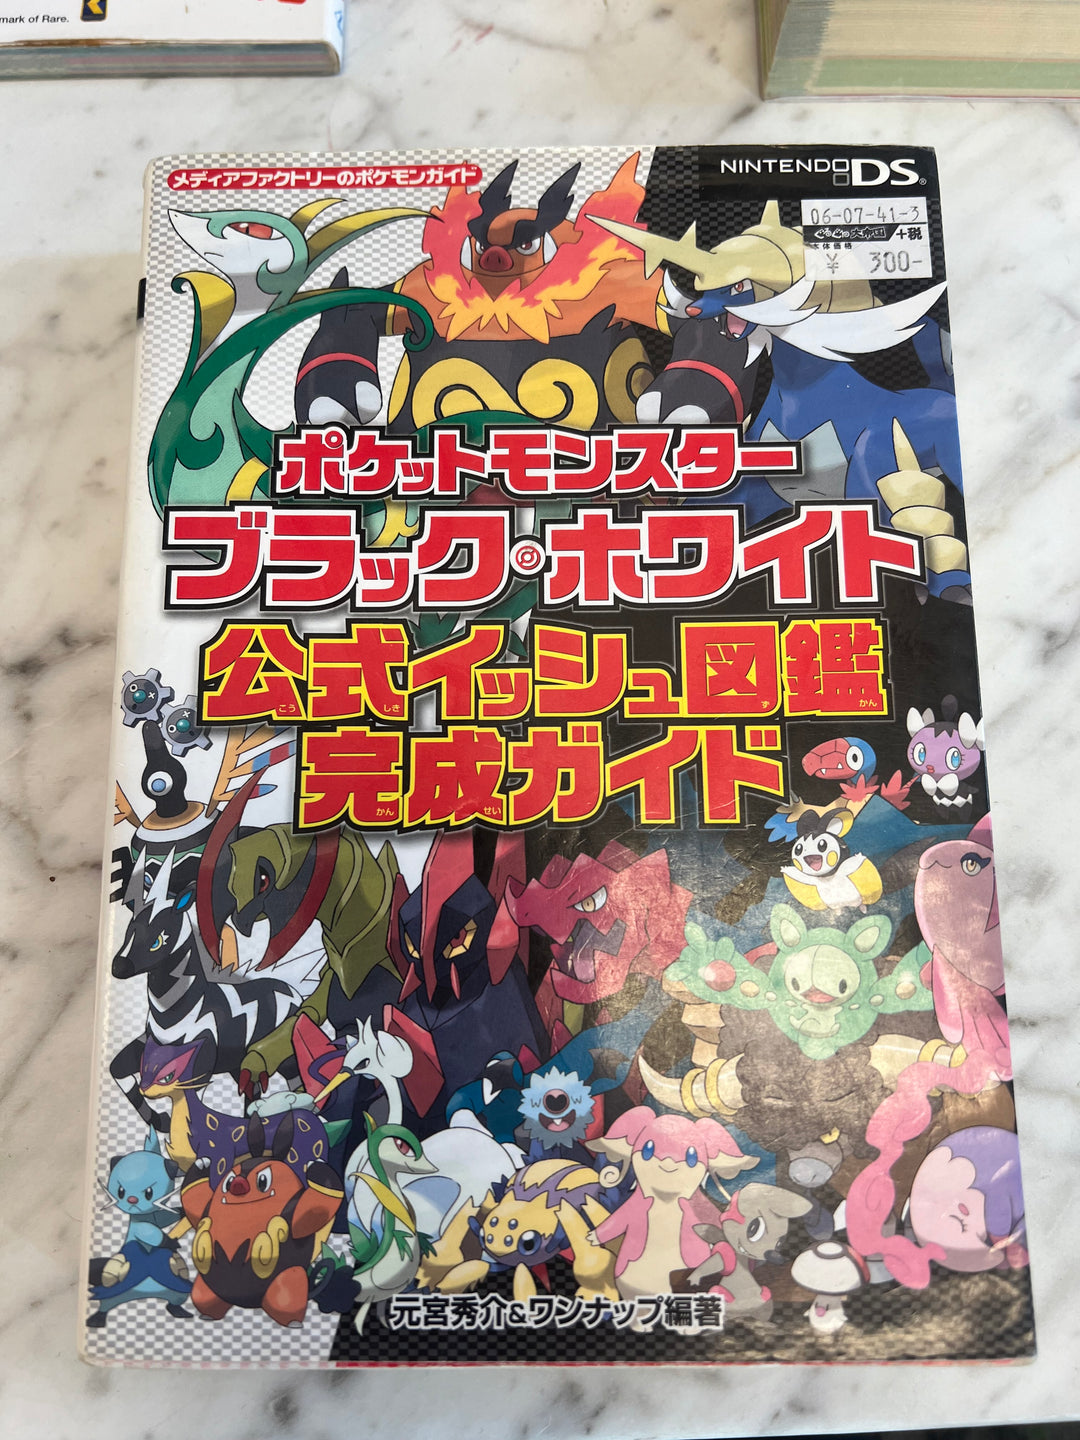 Strategy Guide Nds Ds Pokemon Black White Official Unova Picture Book Completion JP DU62524